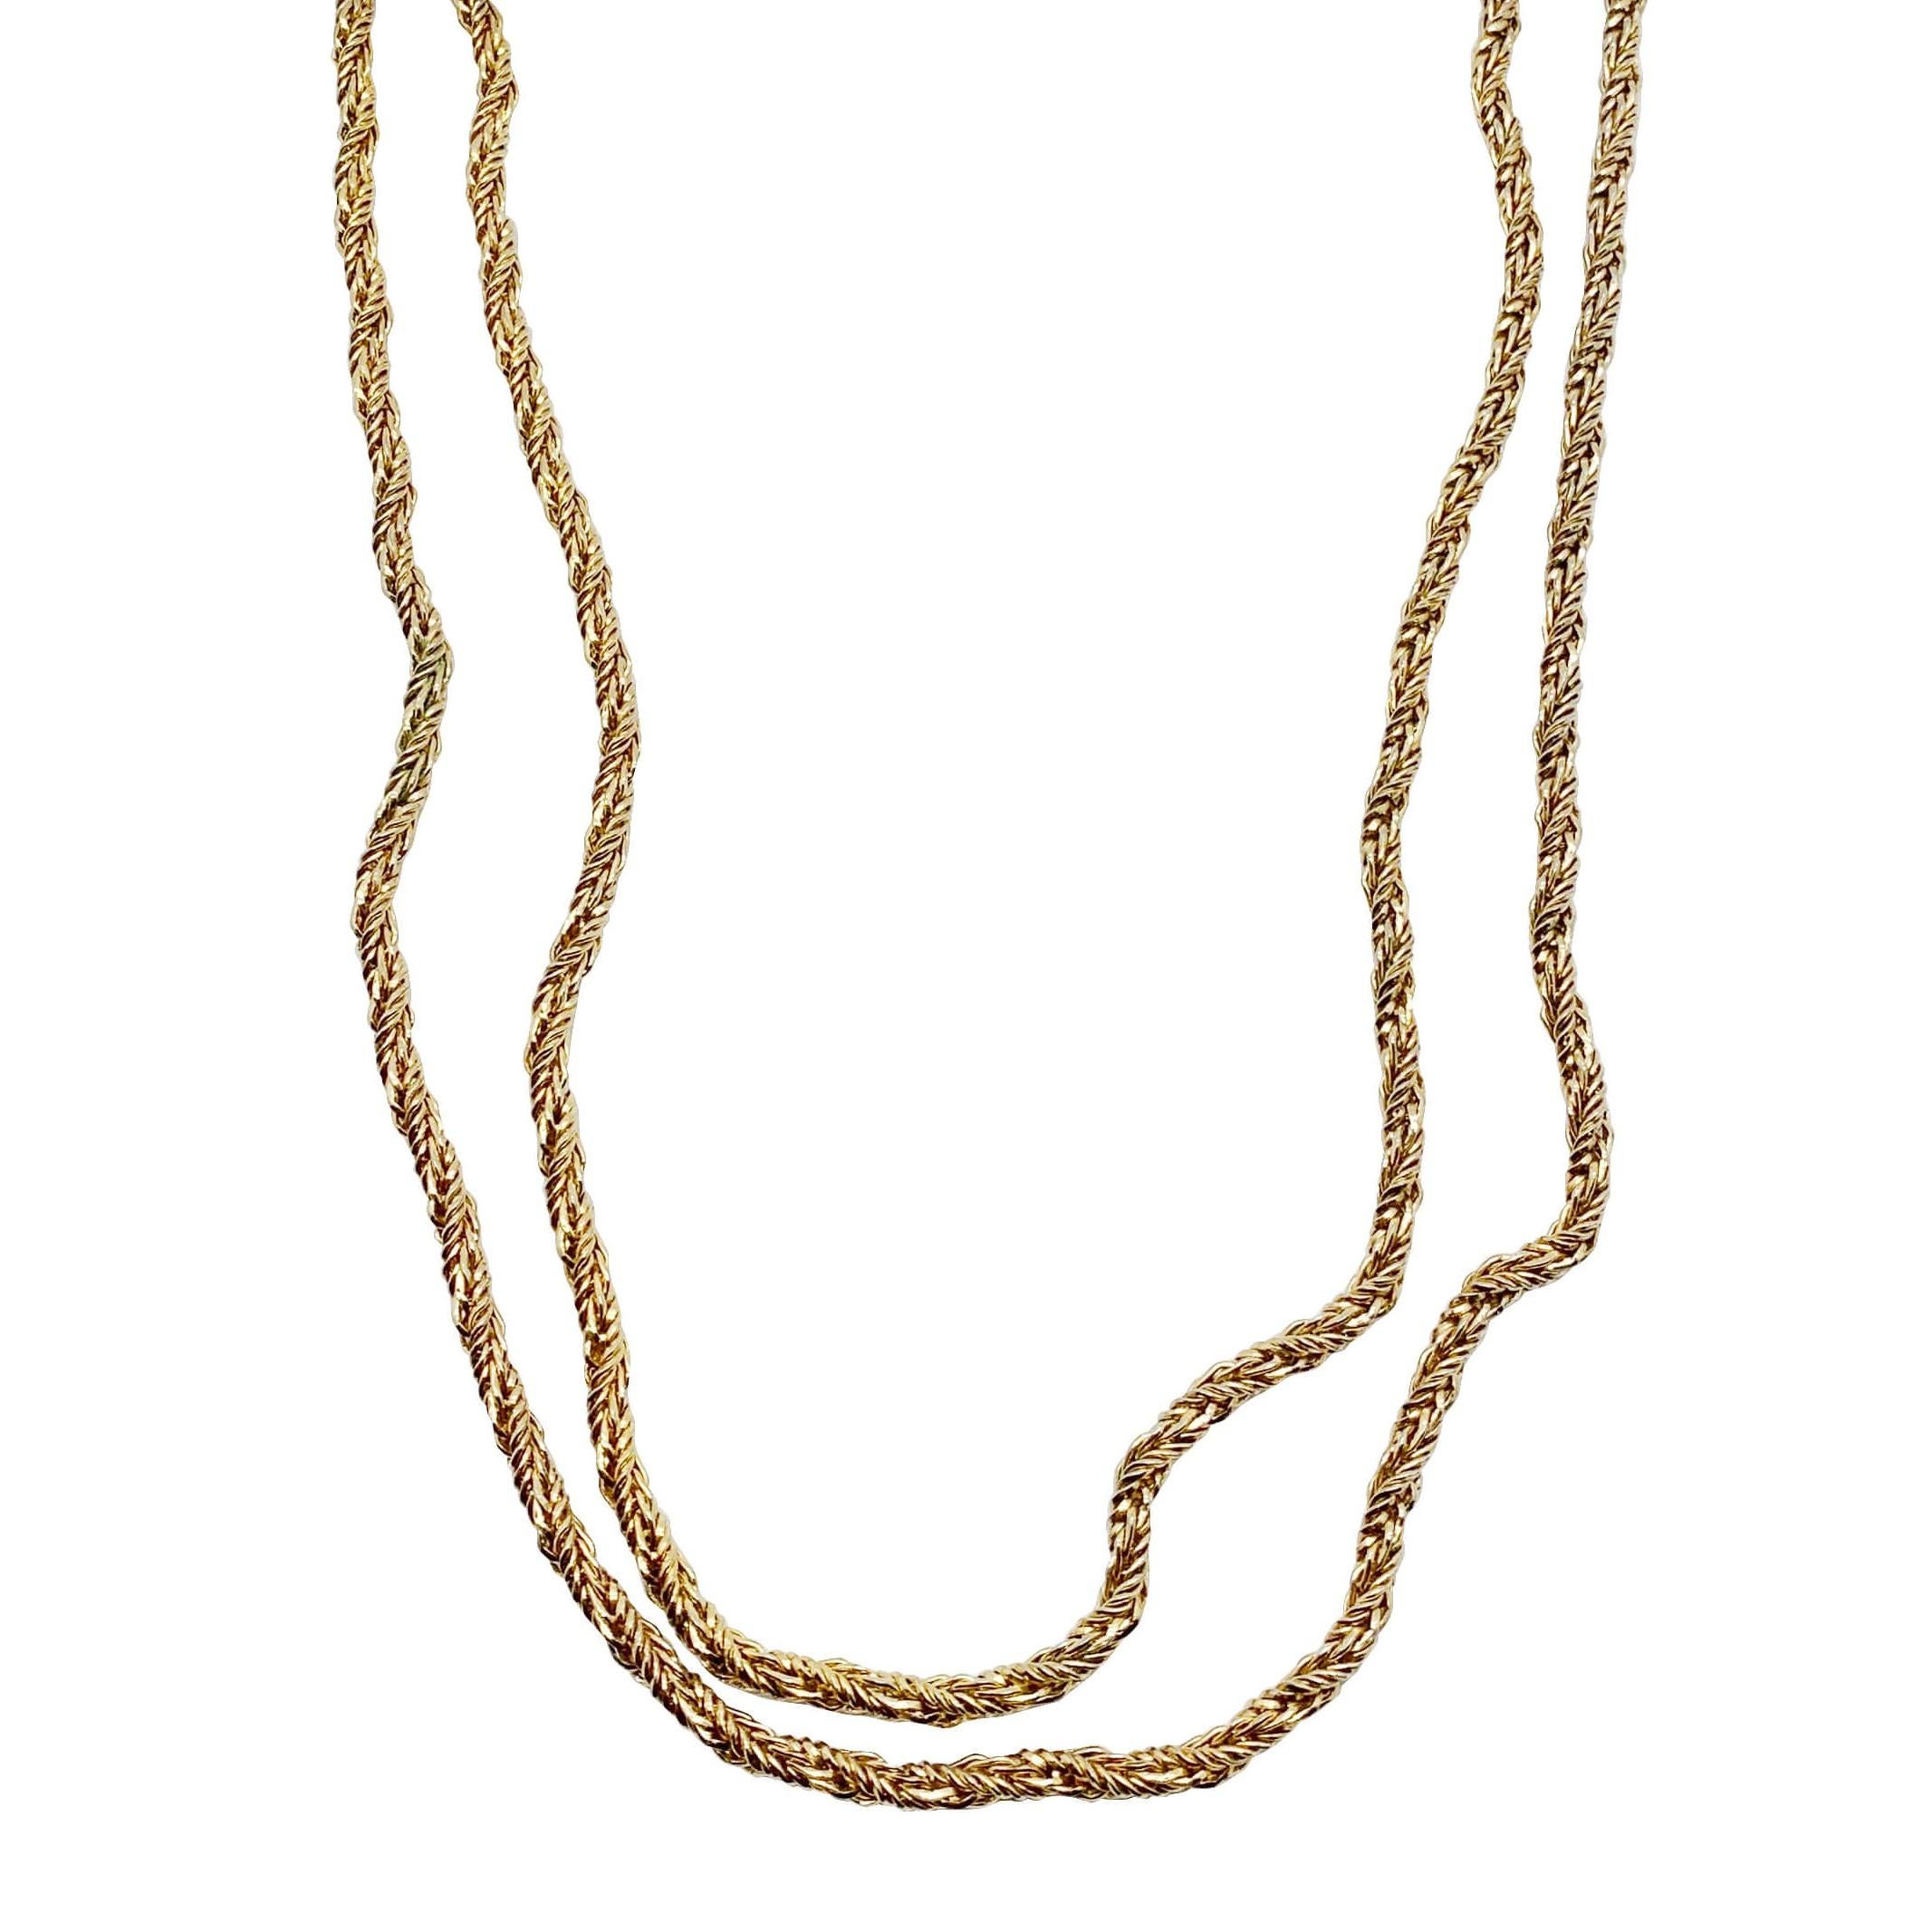 Women's or Men's Vintage Christian Dior Ultra Long Twisted Herringbone Chain 1968 For Sale